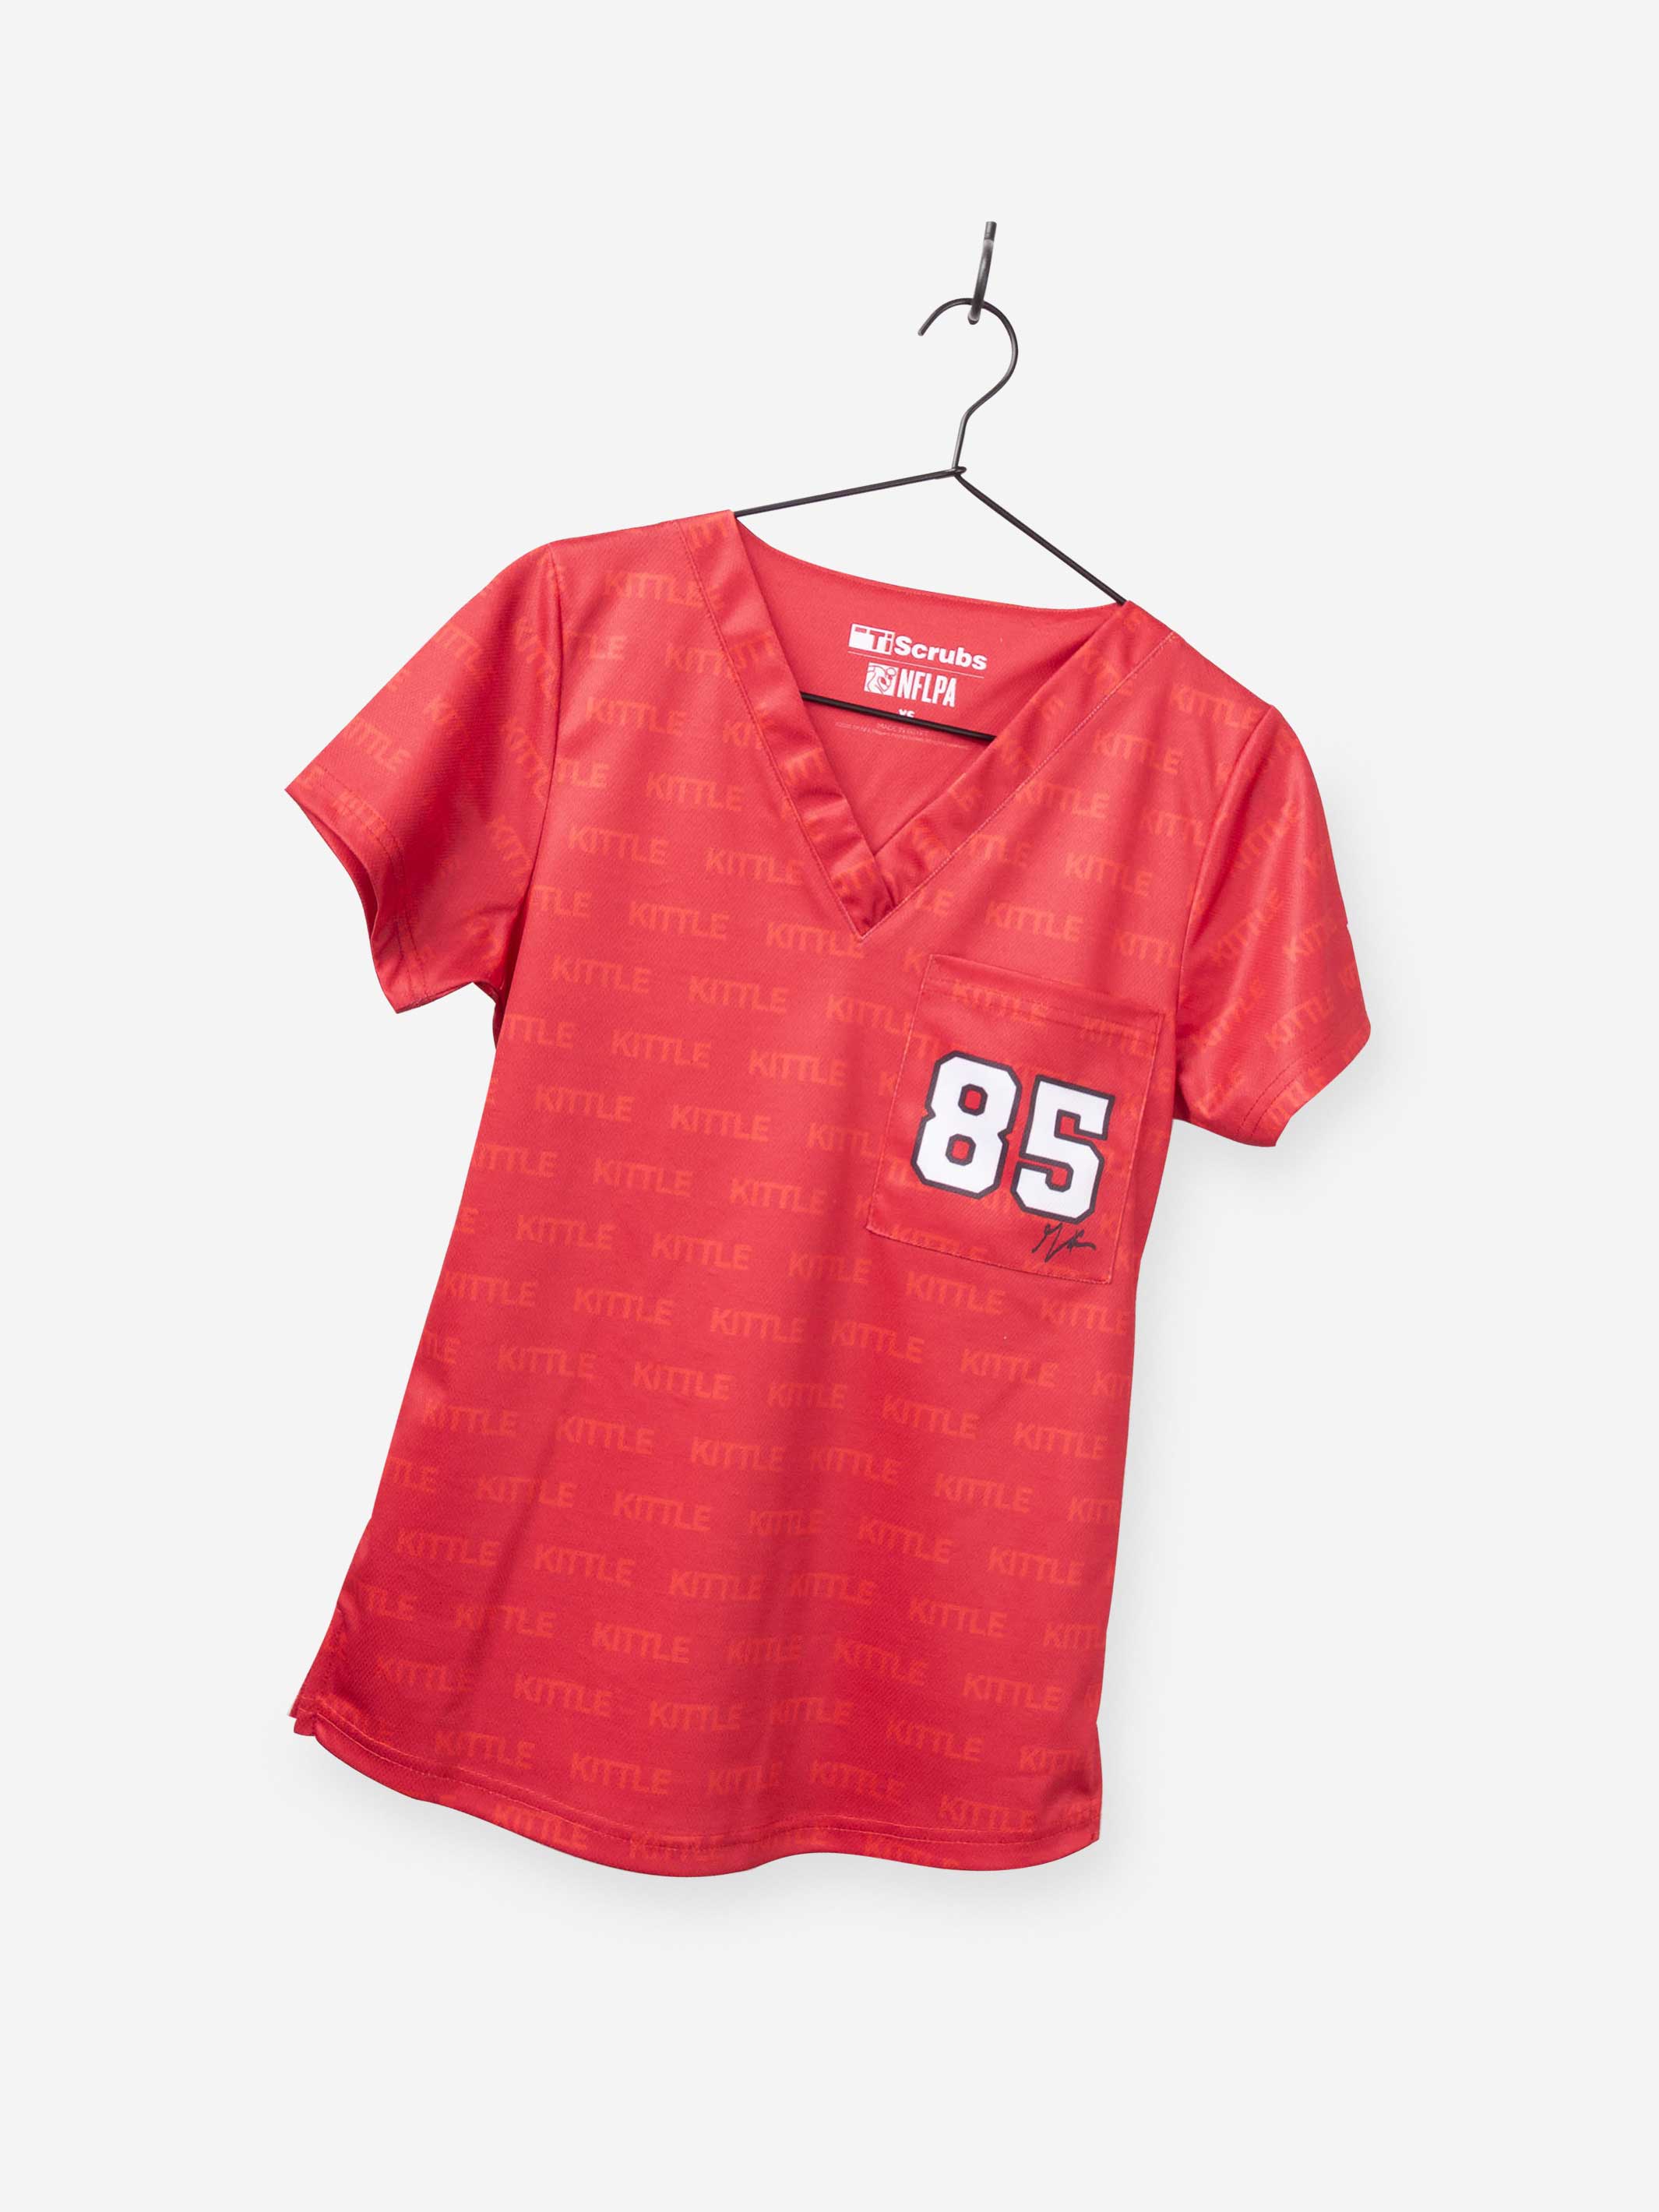 Women's George Kittle Scrub Top in Red Jersey Color for football fans